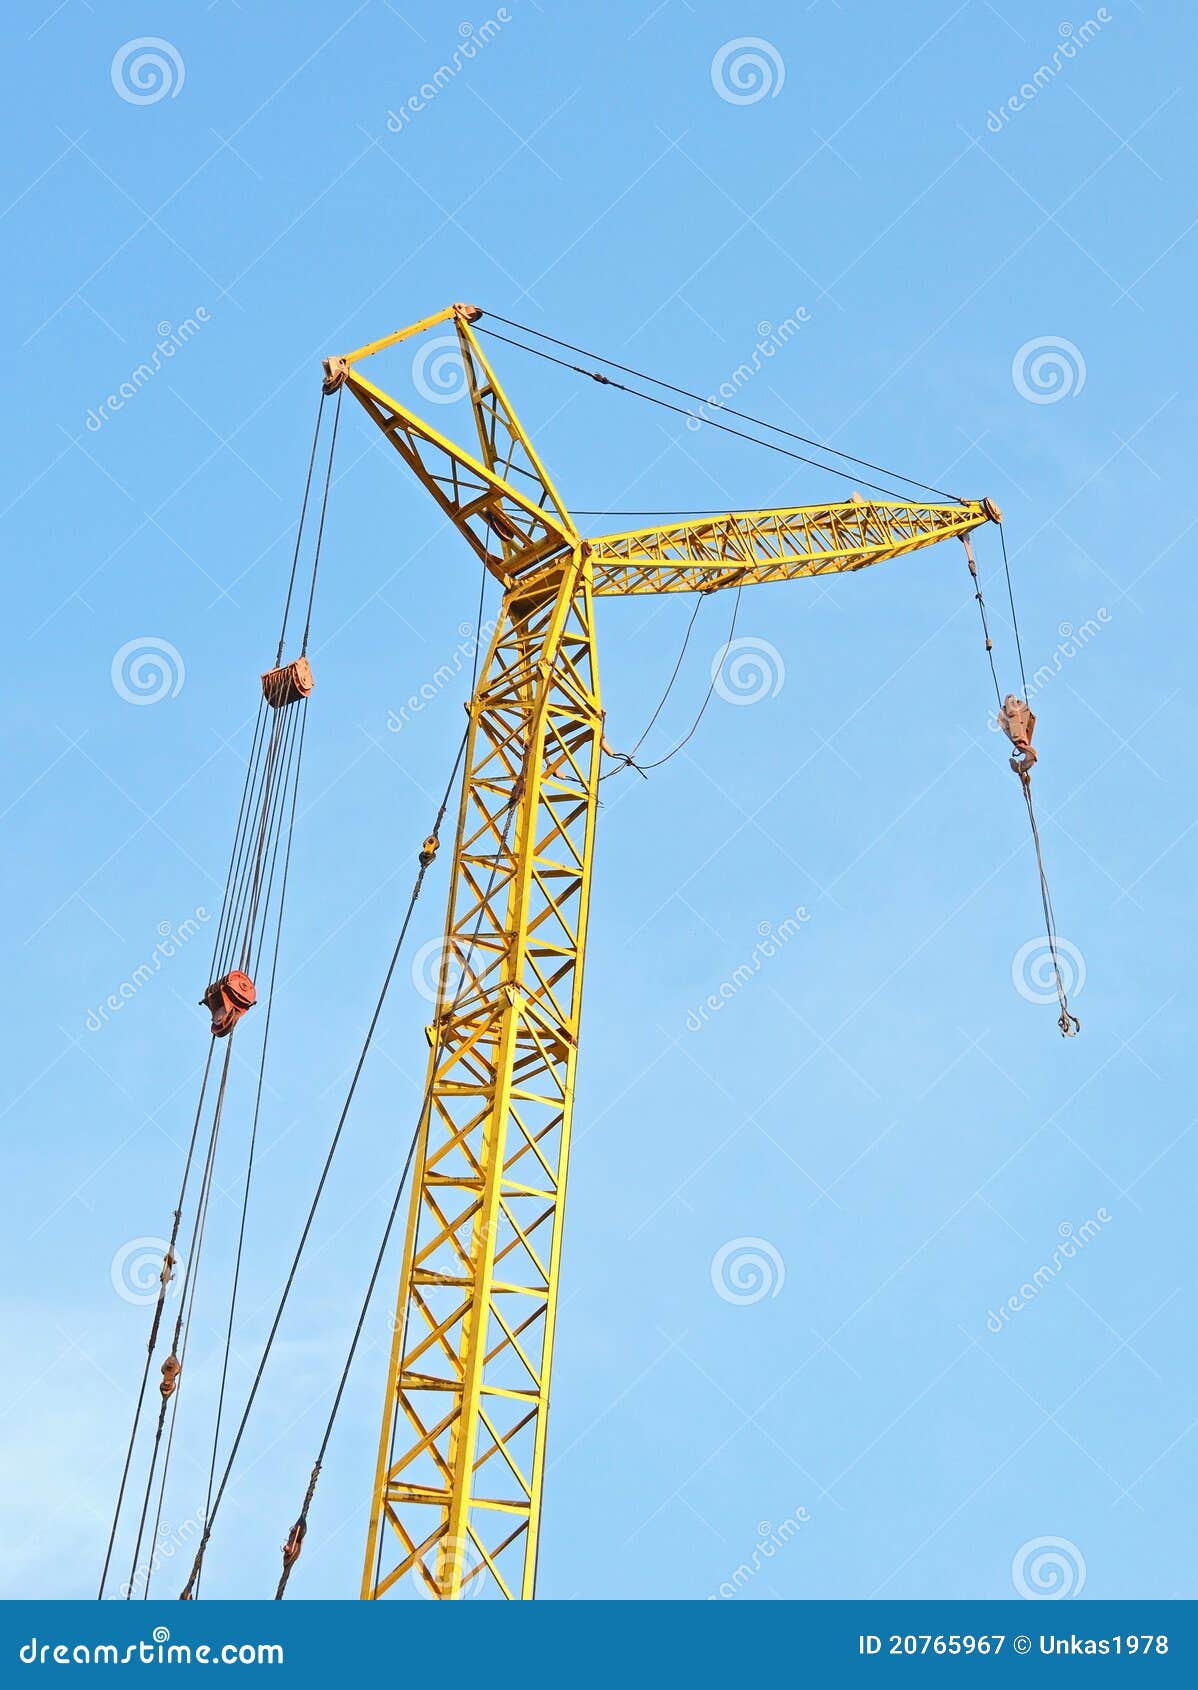 Mobile tower crane stock image. Image of industrial, rise - 20765967